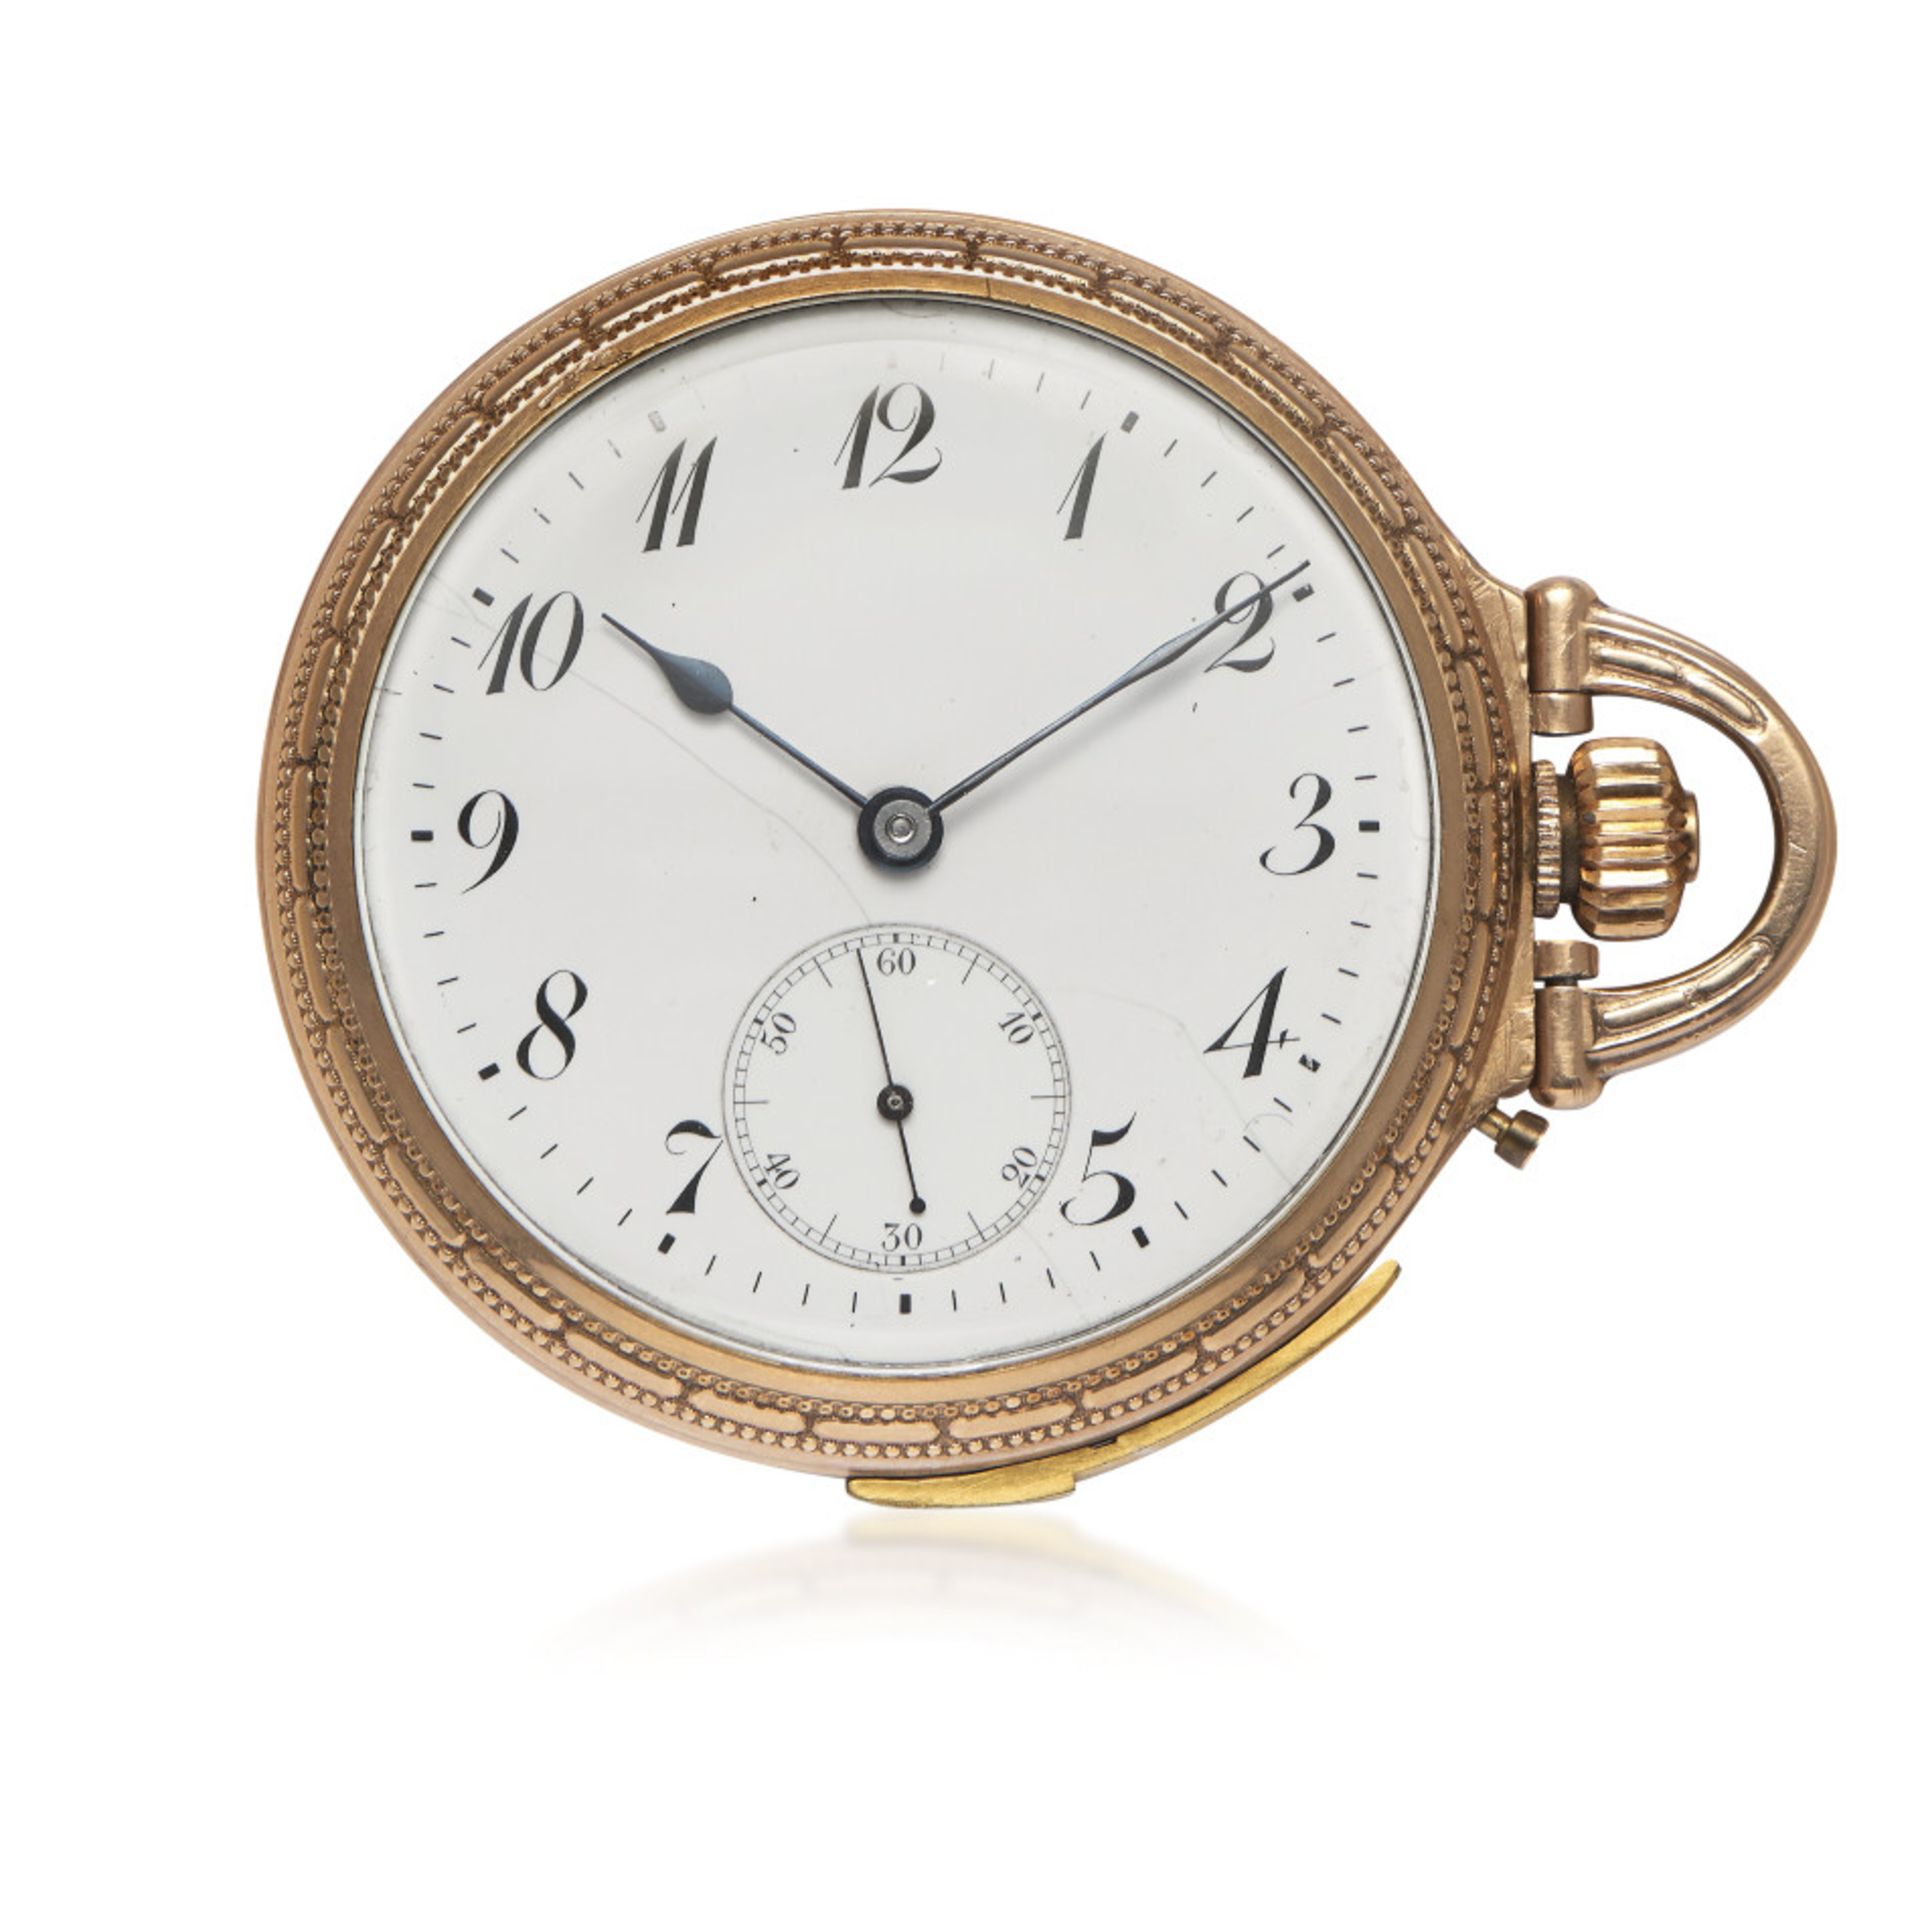 REPEATER WATCH, 20s - REPEATER WATCH, 20S Case: signed Keystone Watch Case, n. 9732208, three-body